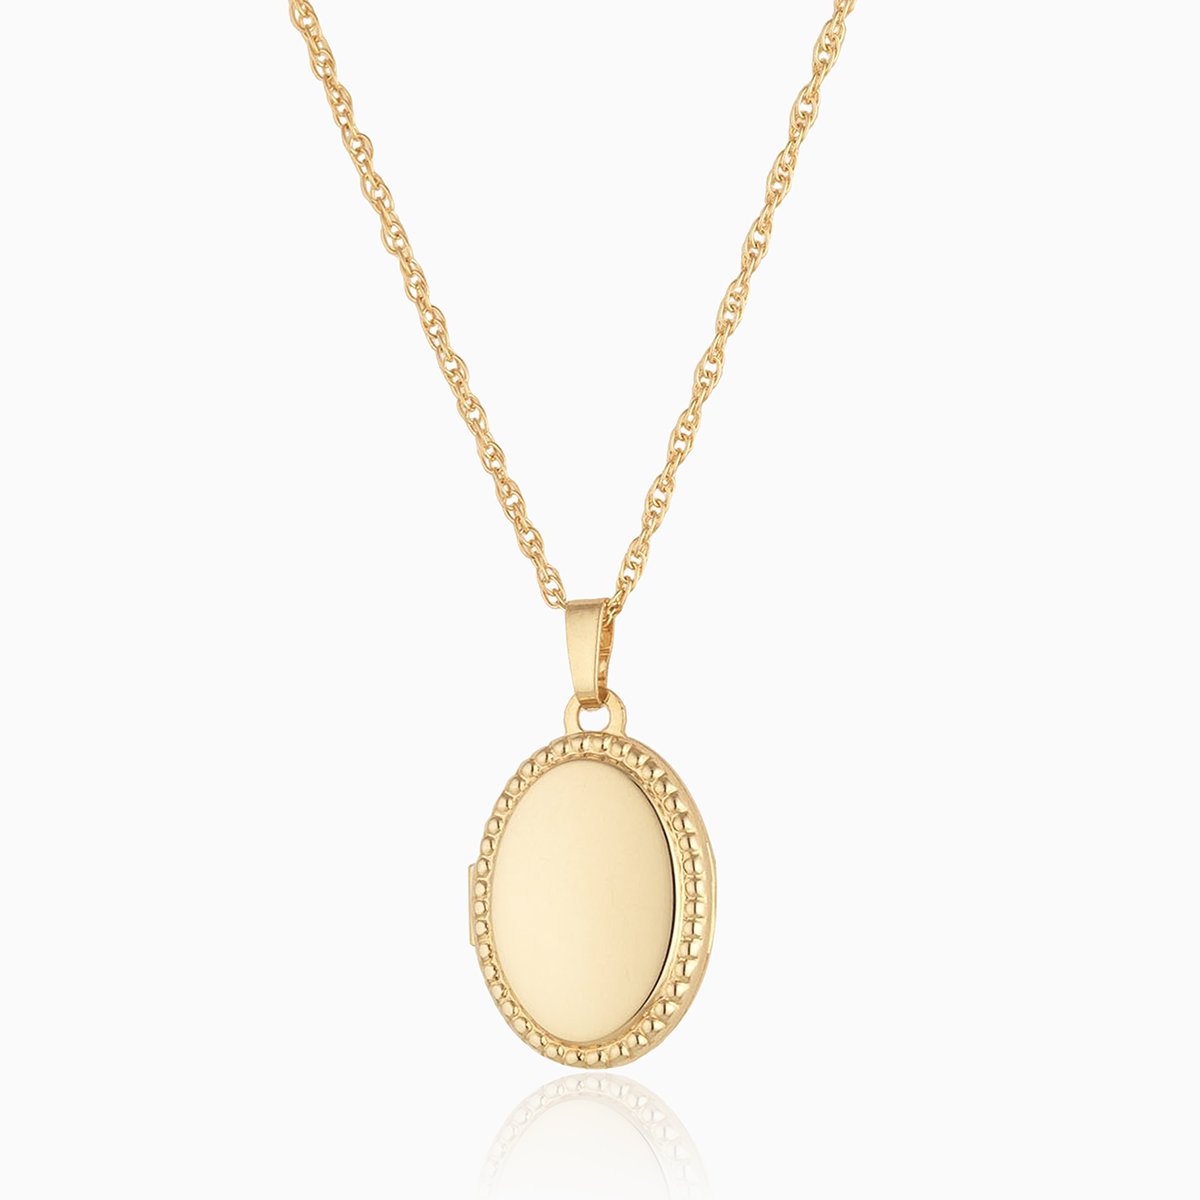 9 ct gold oval locket wiht a beaded border on a 9 ct gold rope chain